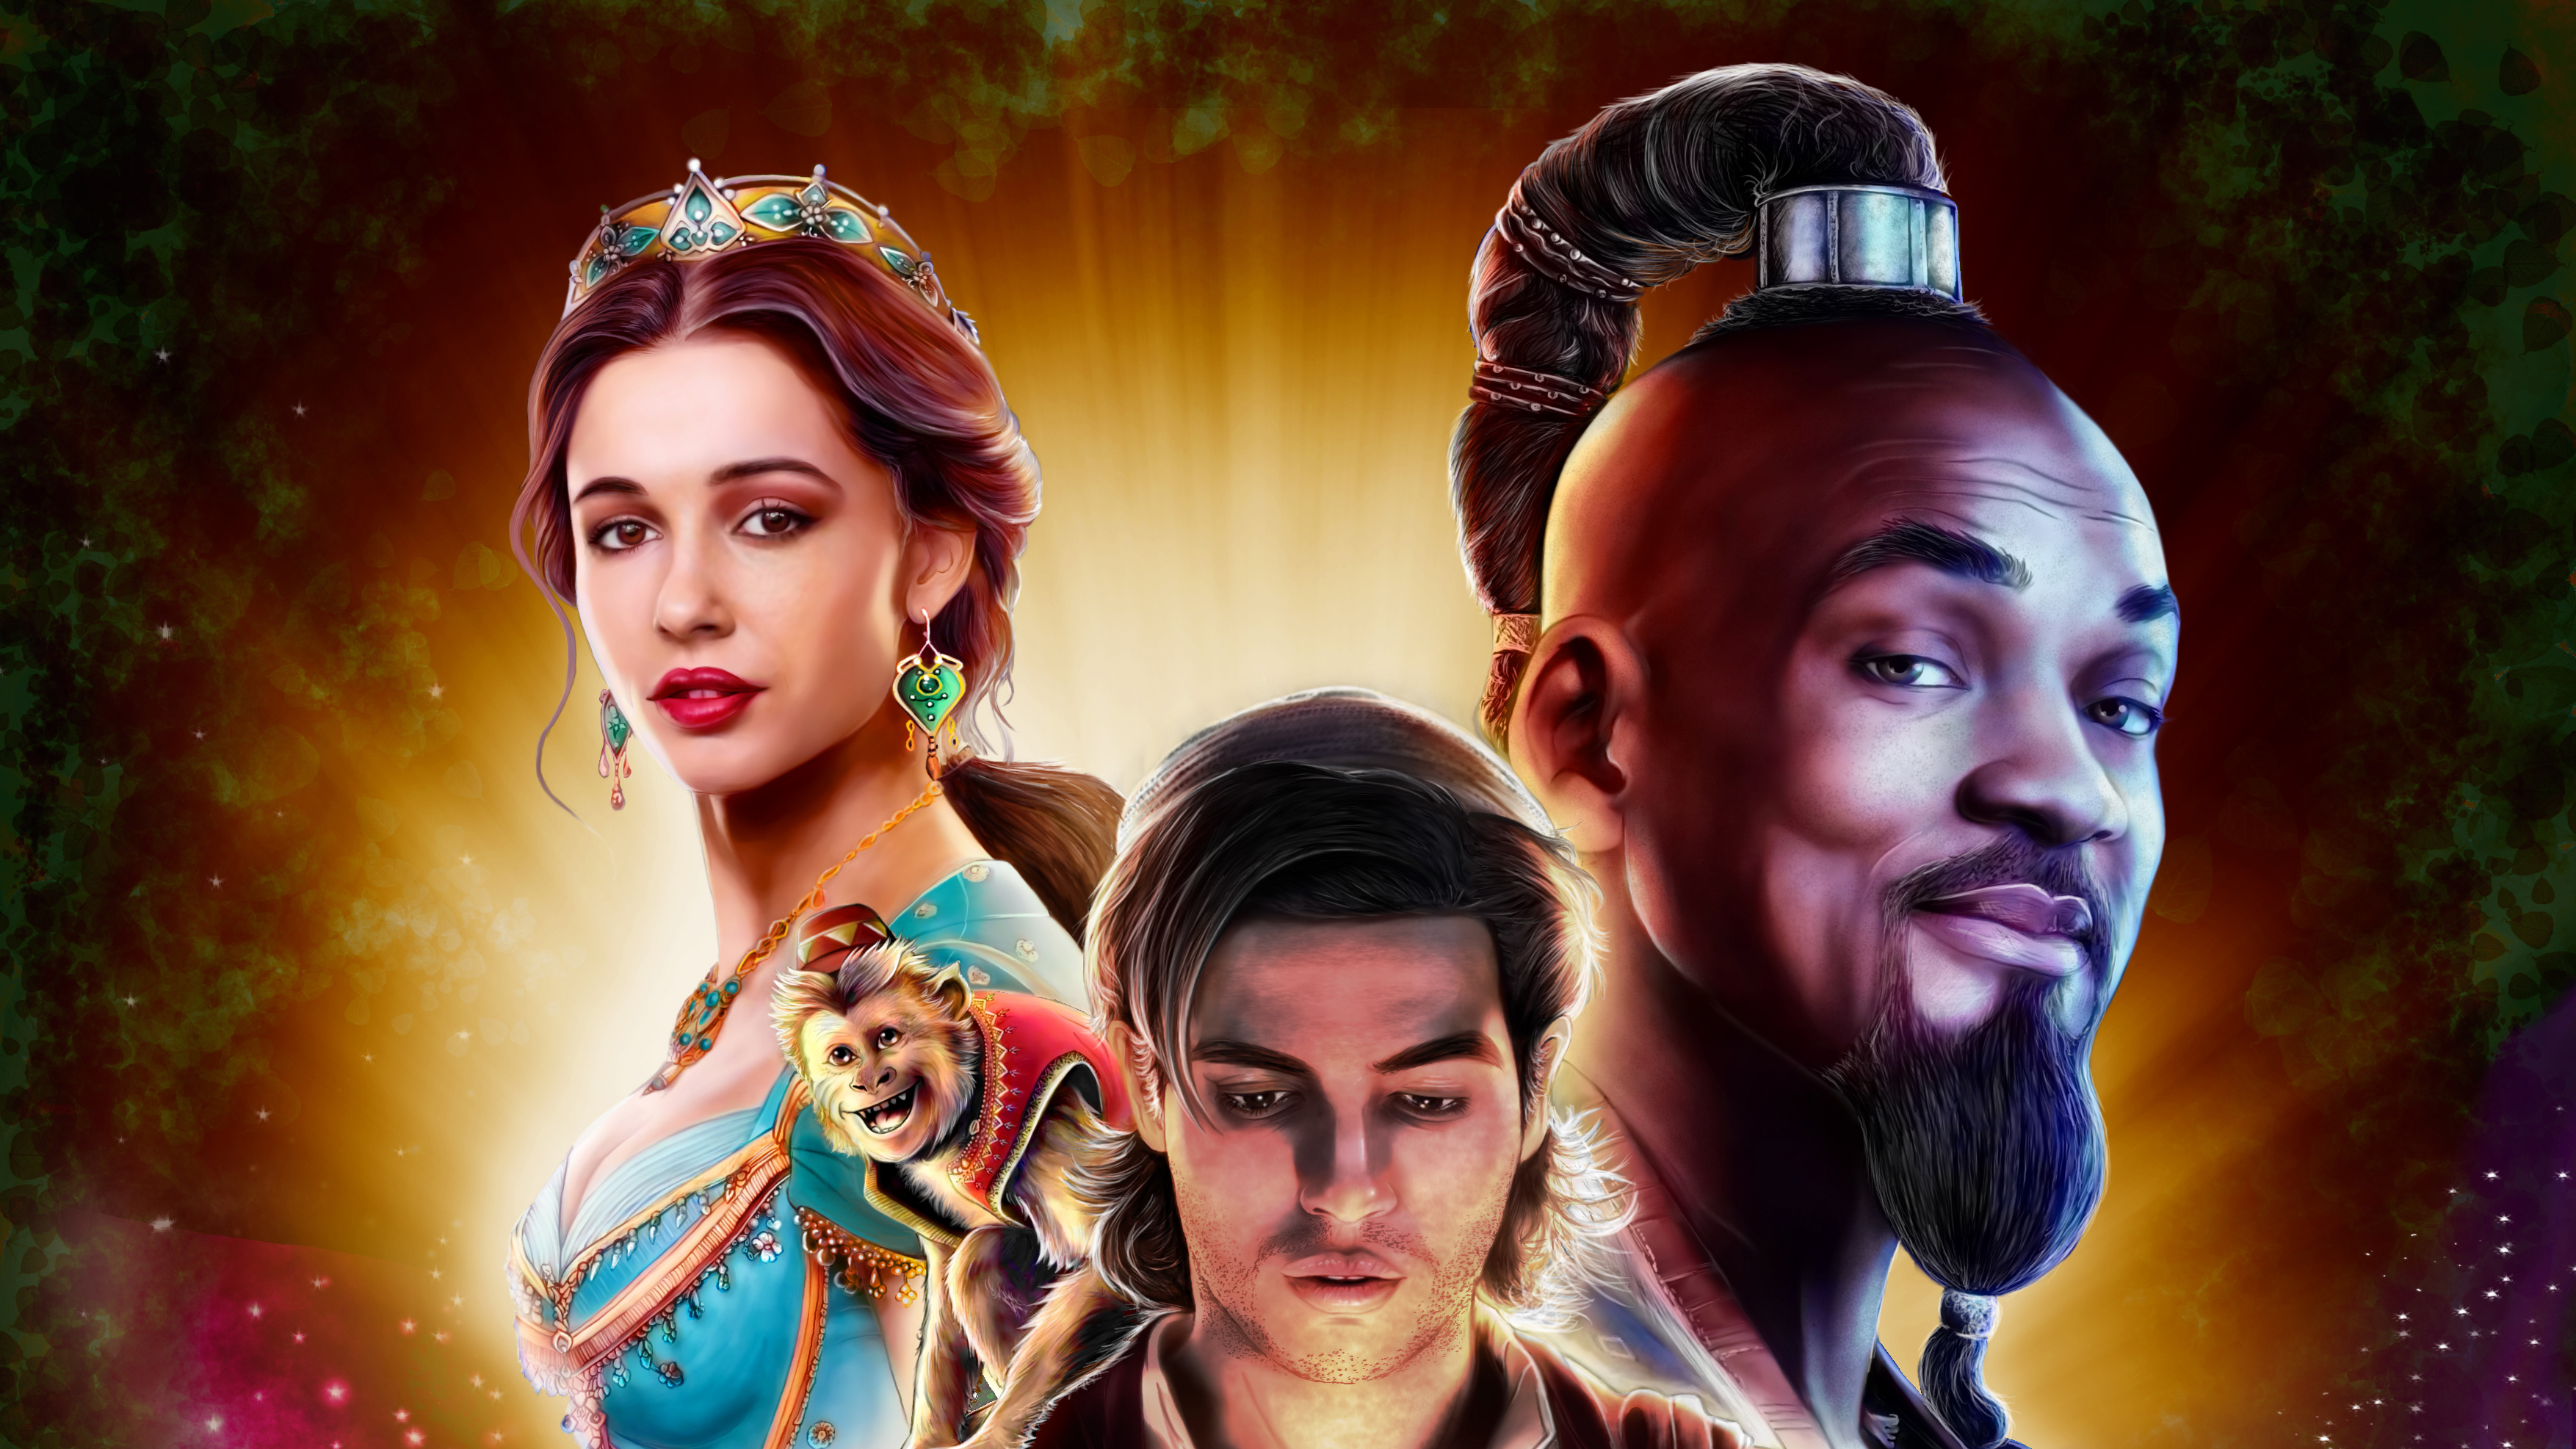 Wallpapers aladdin movies 2019 Movies on the desktop